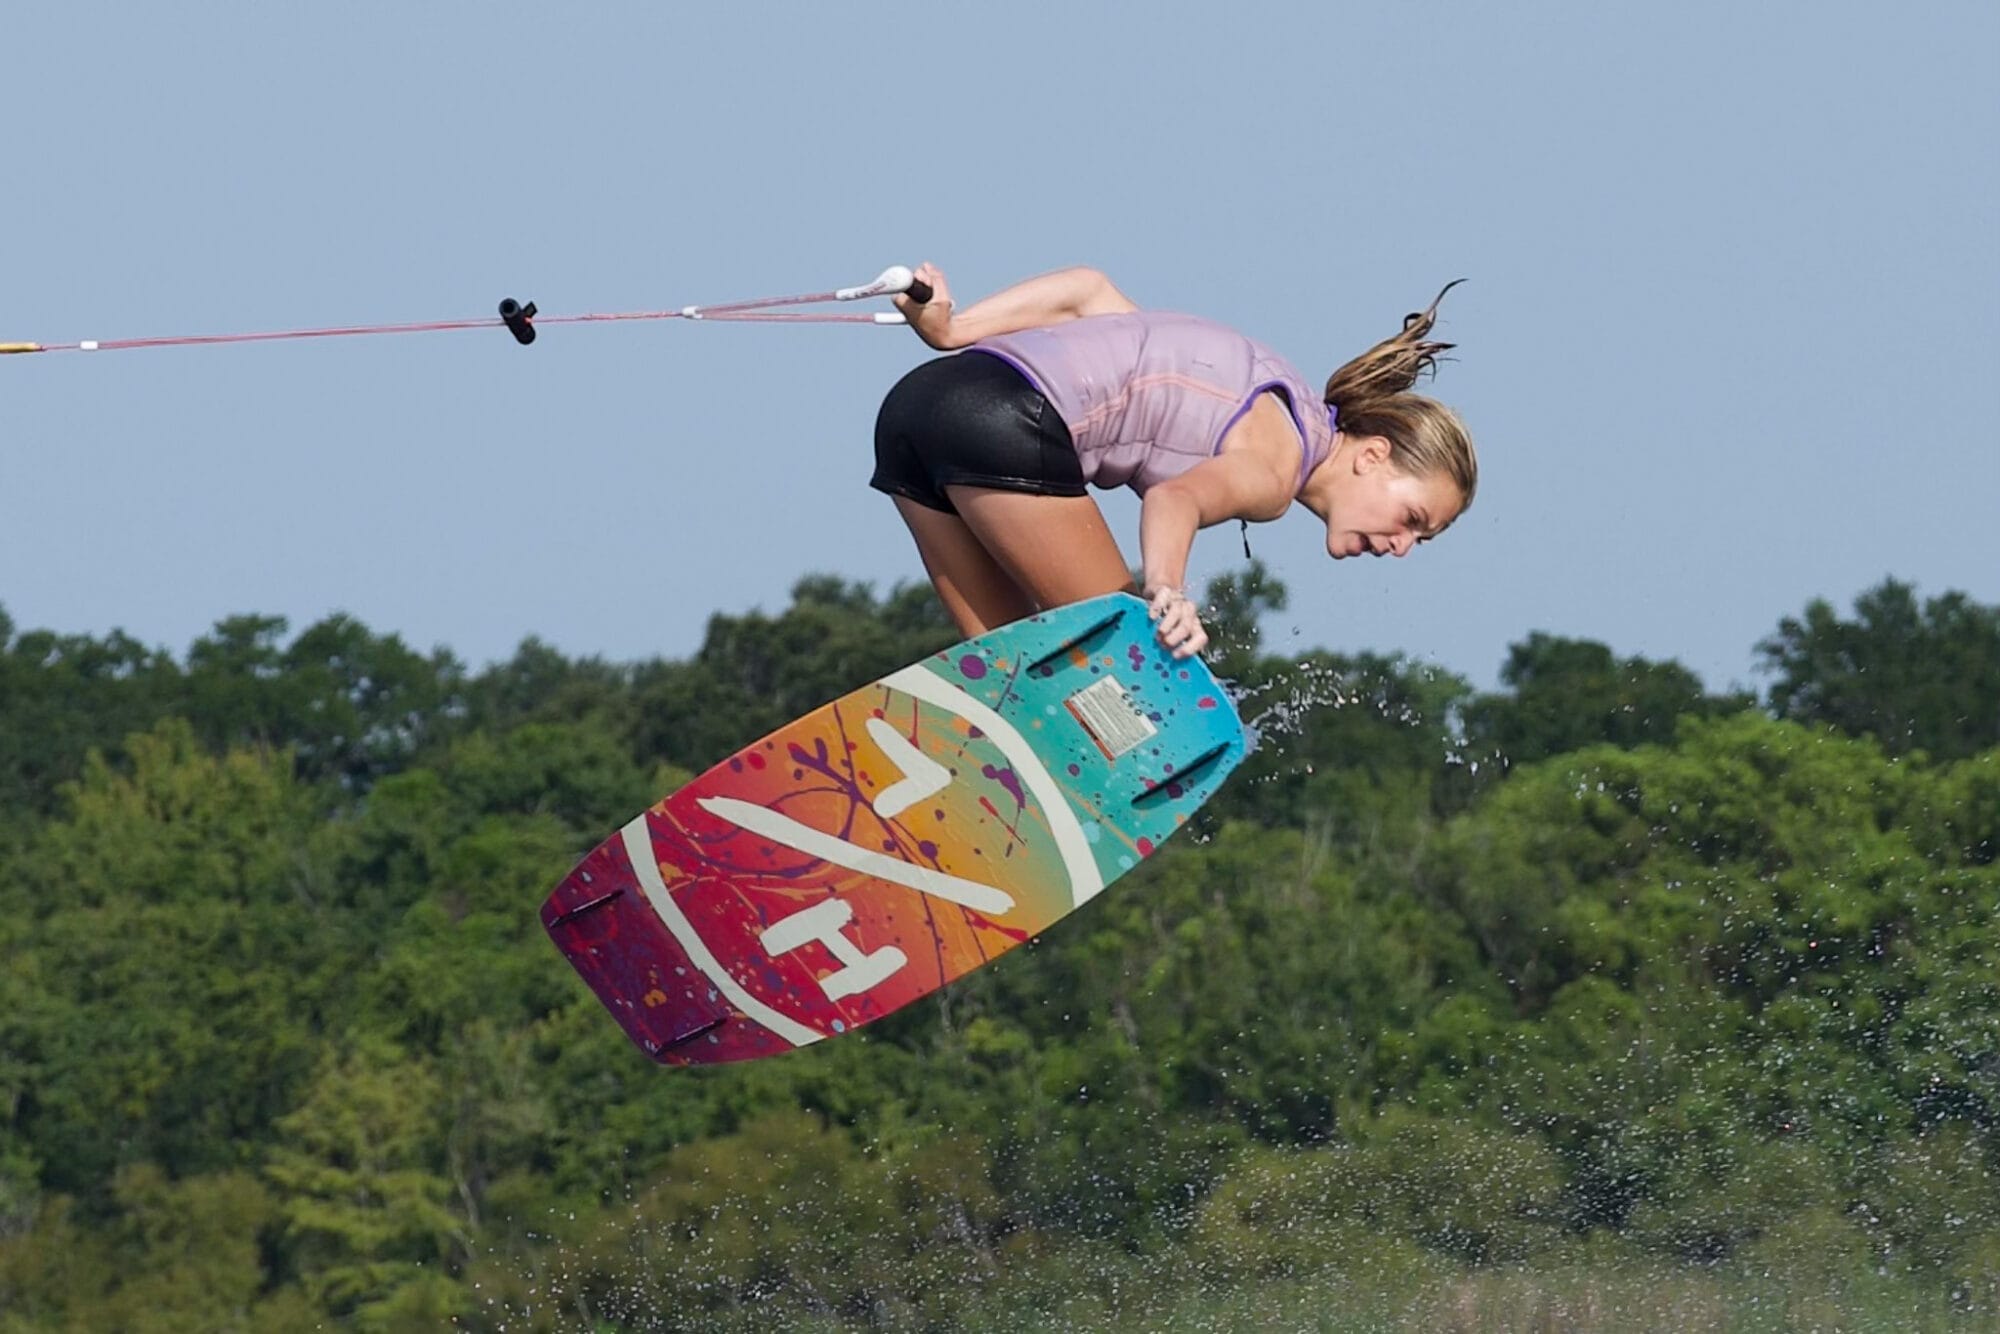 A woman wakeboarding mid-air with a colorful board, holding a tow rope, above a body of water.